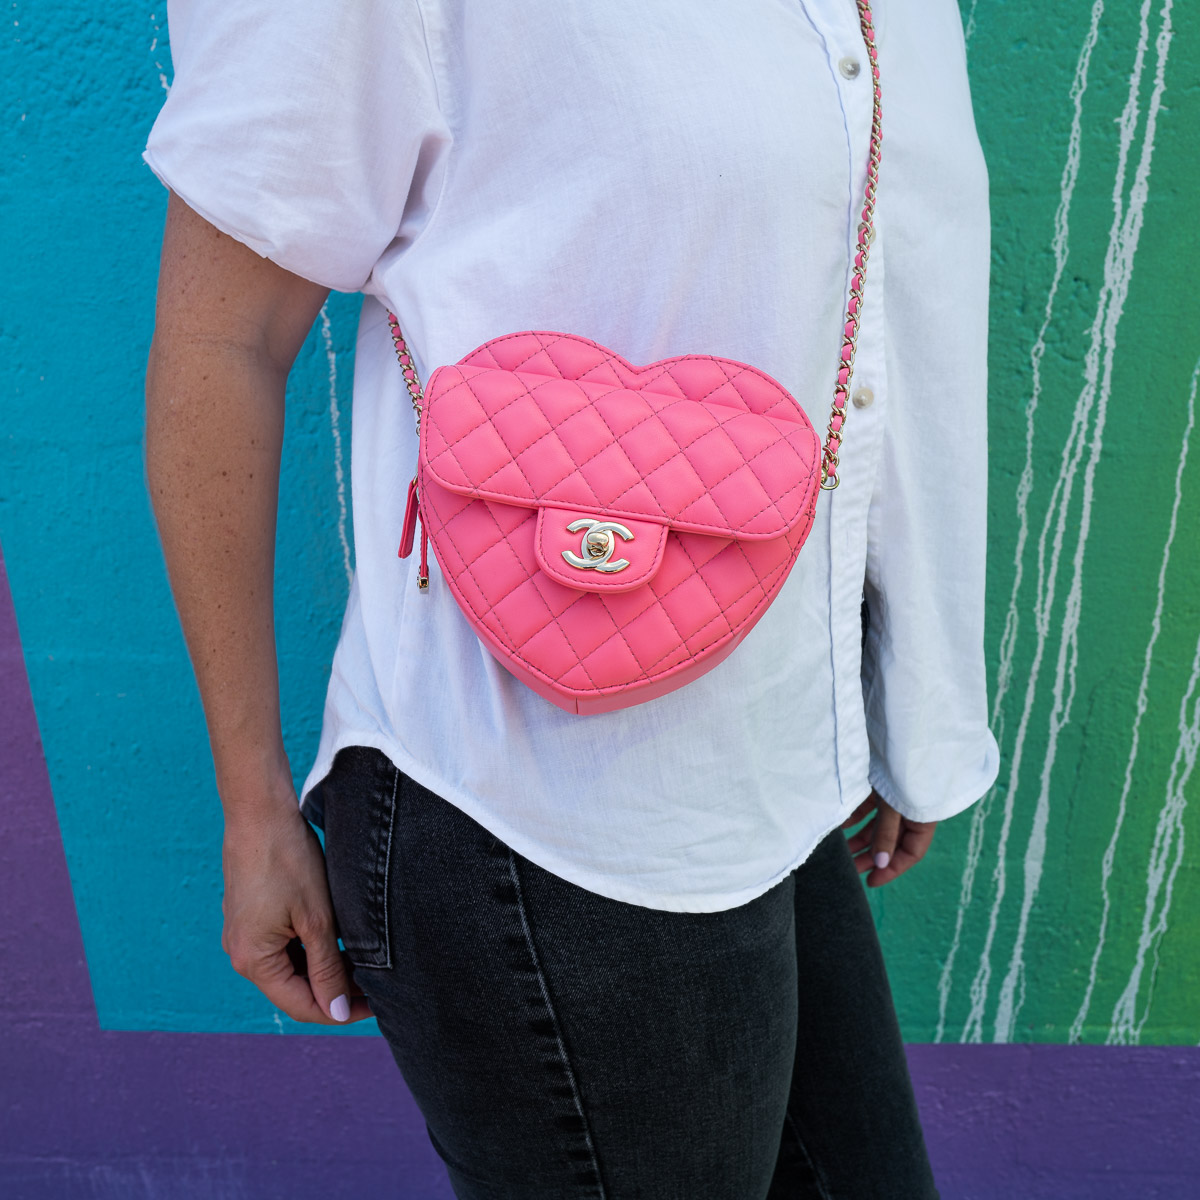 Chanel Heart Bag in Pink